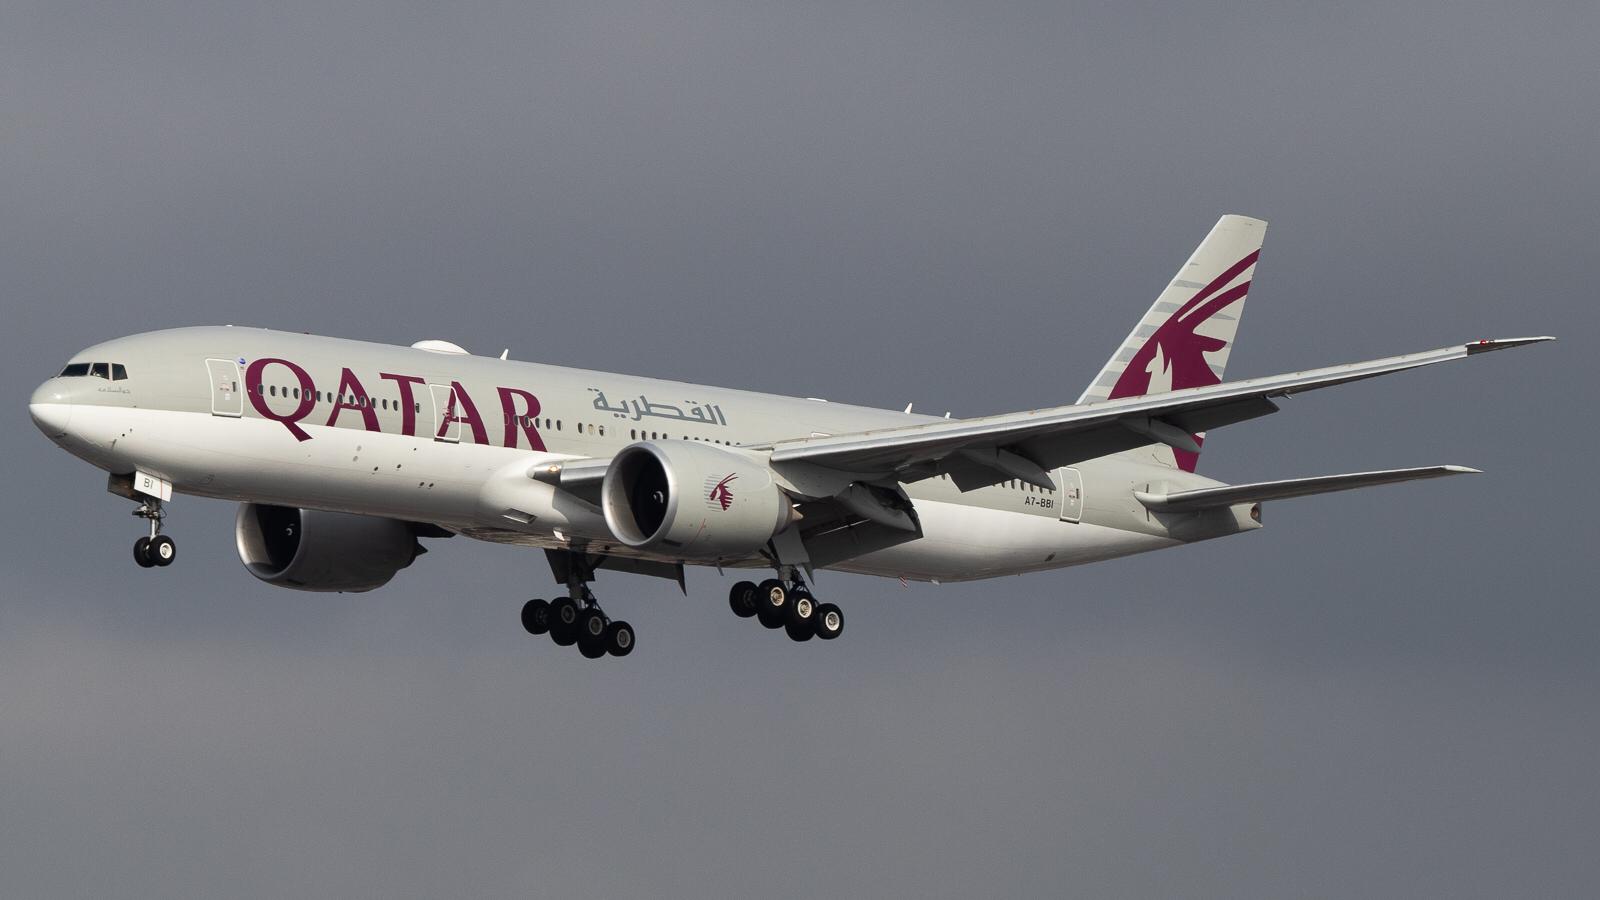 Qatar Airways to lease two former Cathay Pacific Boeing 777-300ER